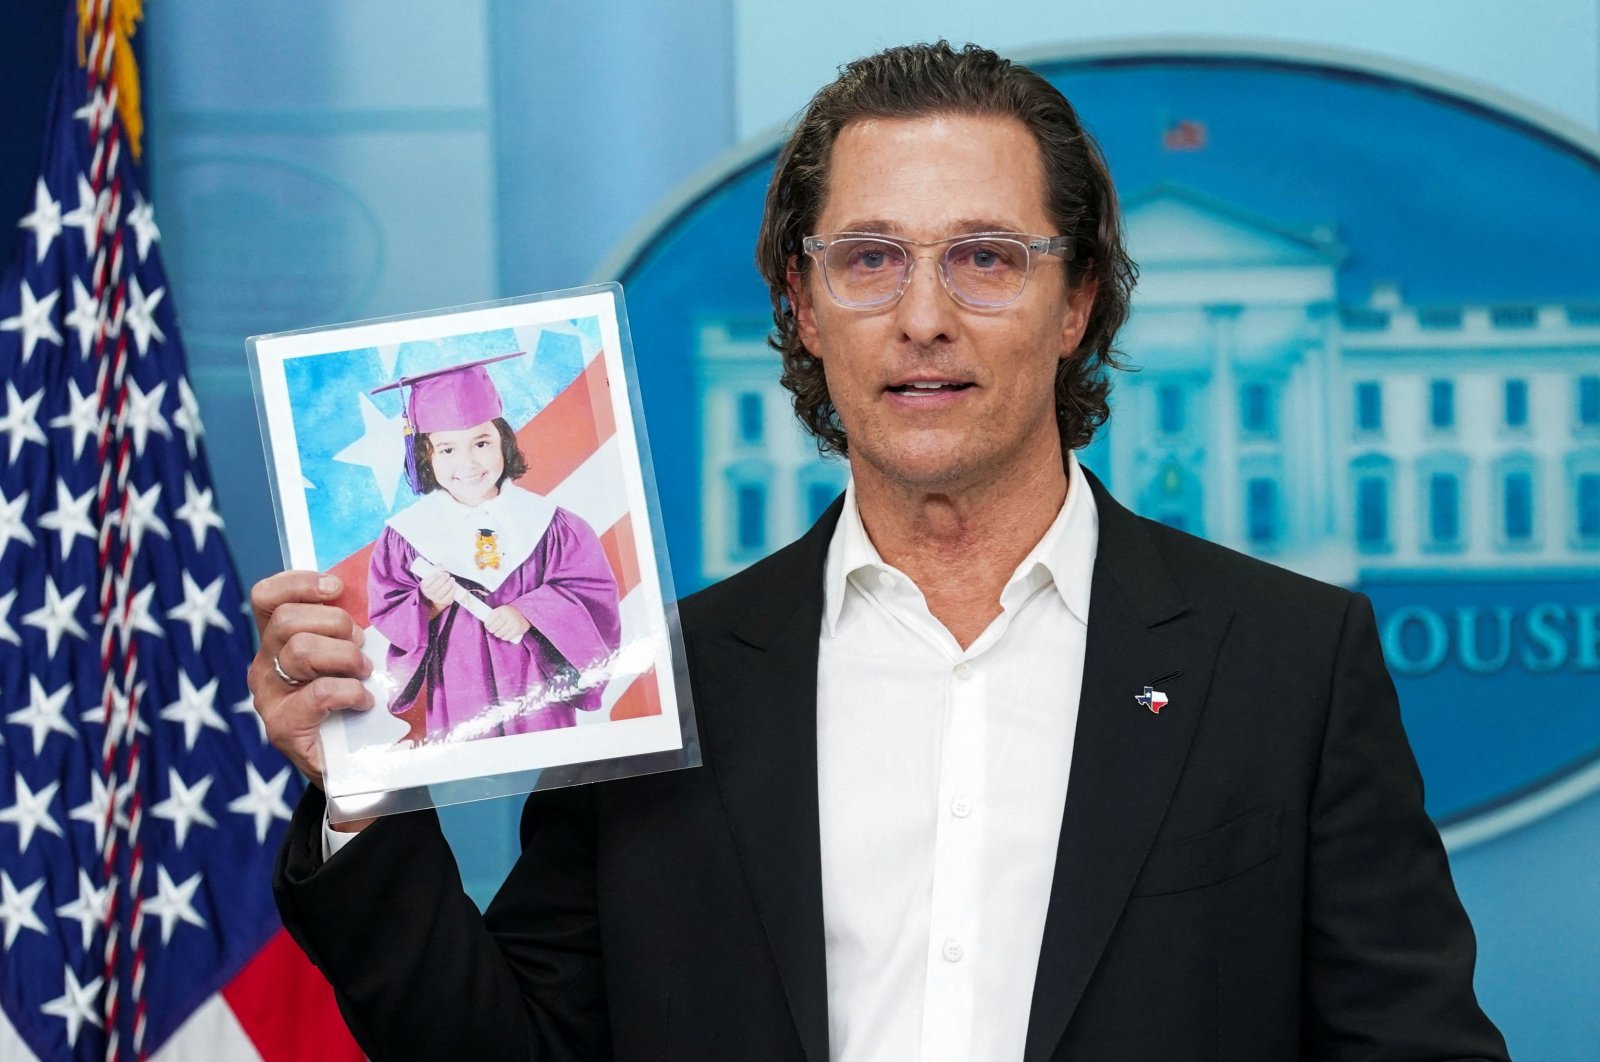 Actor Matthew McConaughey holds a picture of 10-year-old school shooting victim Alithia Ramirez as he speaks to reporters about the recent mass shooting at an elementary school in his hometown of Uvalde, Texas during a press briefing at the White House in Washington, U.S., June 7, 2022. (Reuters Photo)